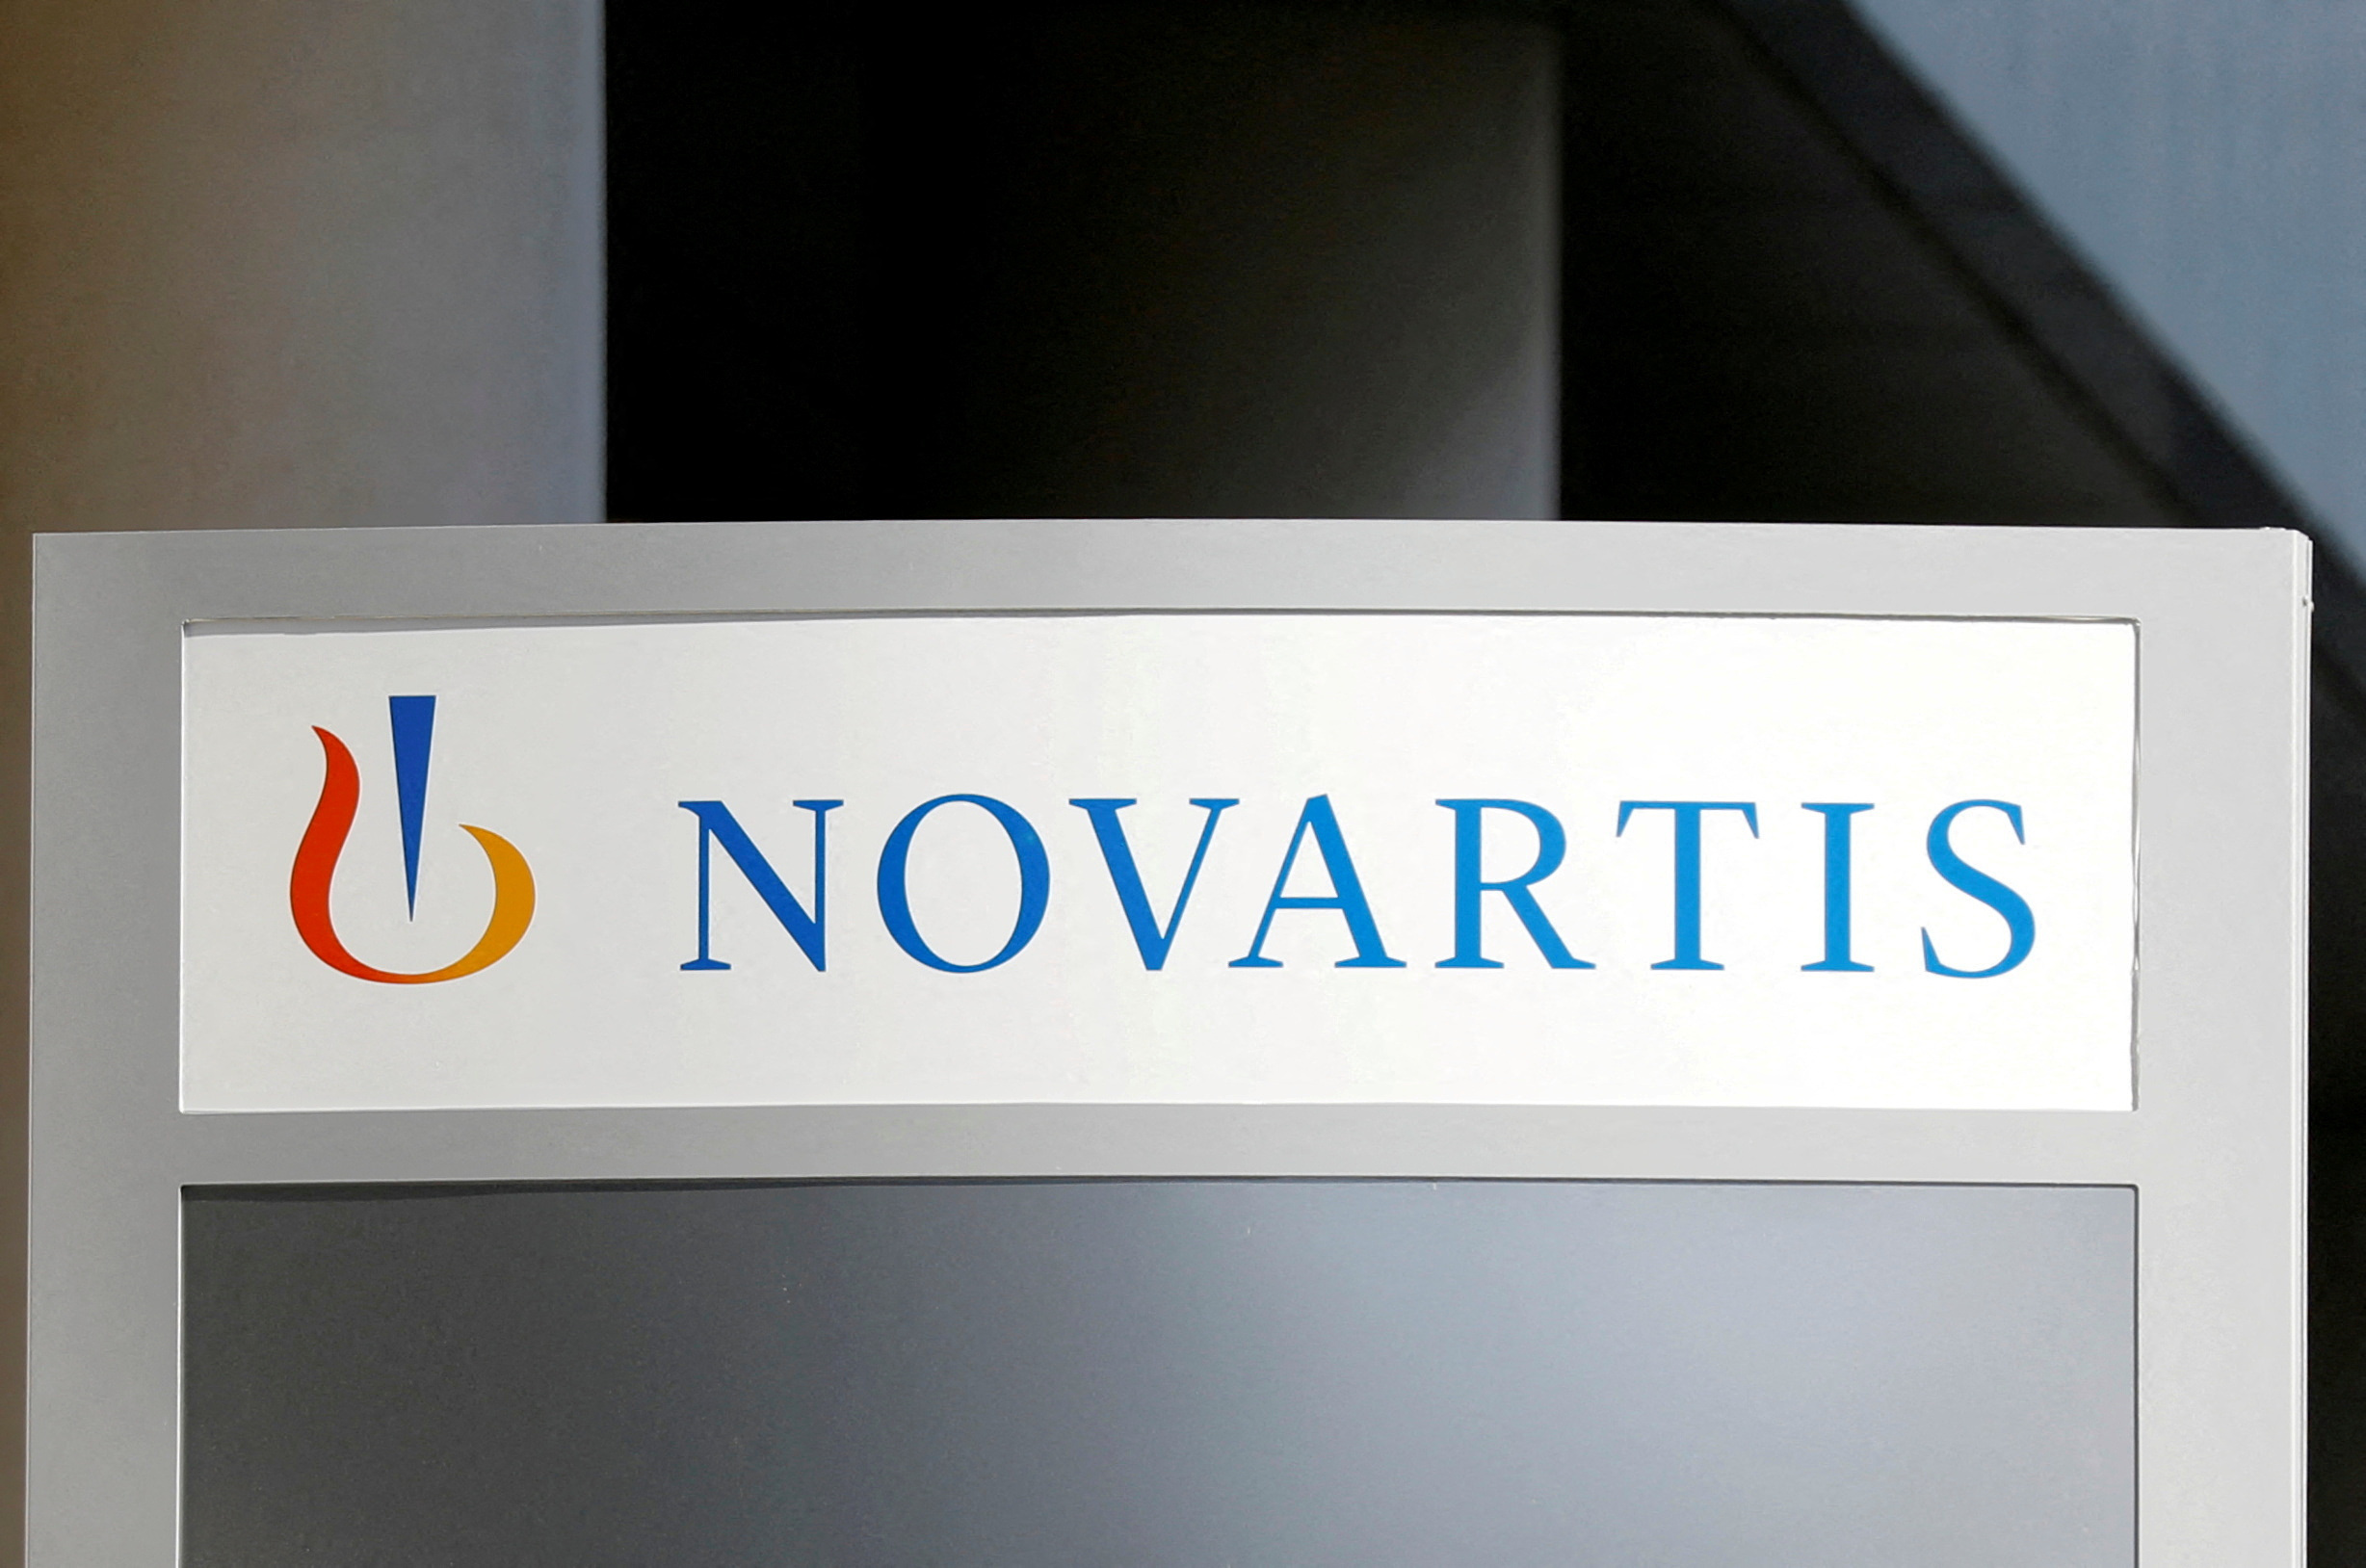 FILE PHOTO: The logo of Swiss drugmaker Novartis is pictured at the company's French headquarters in Rueil-Malmaison near Paris, France, April 22, 2020. REUTERS/Charles Platiau/File Photo